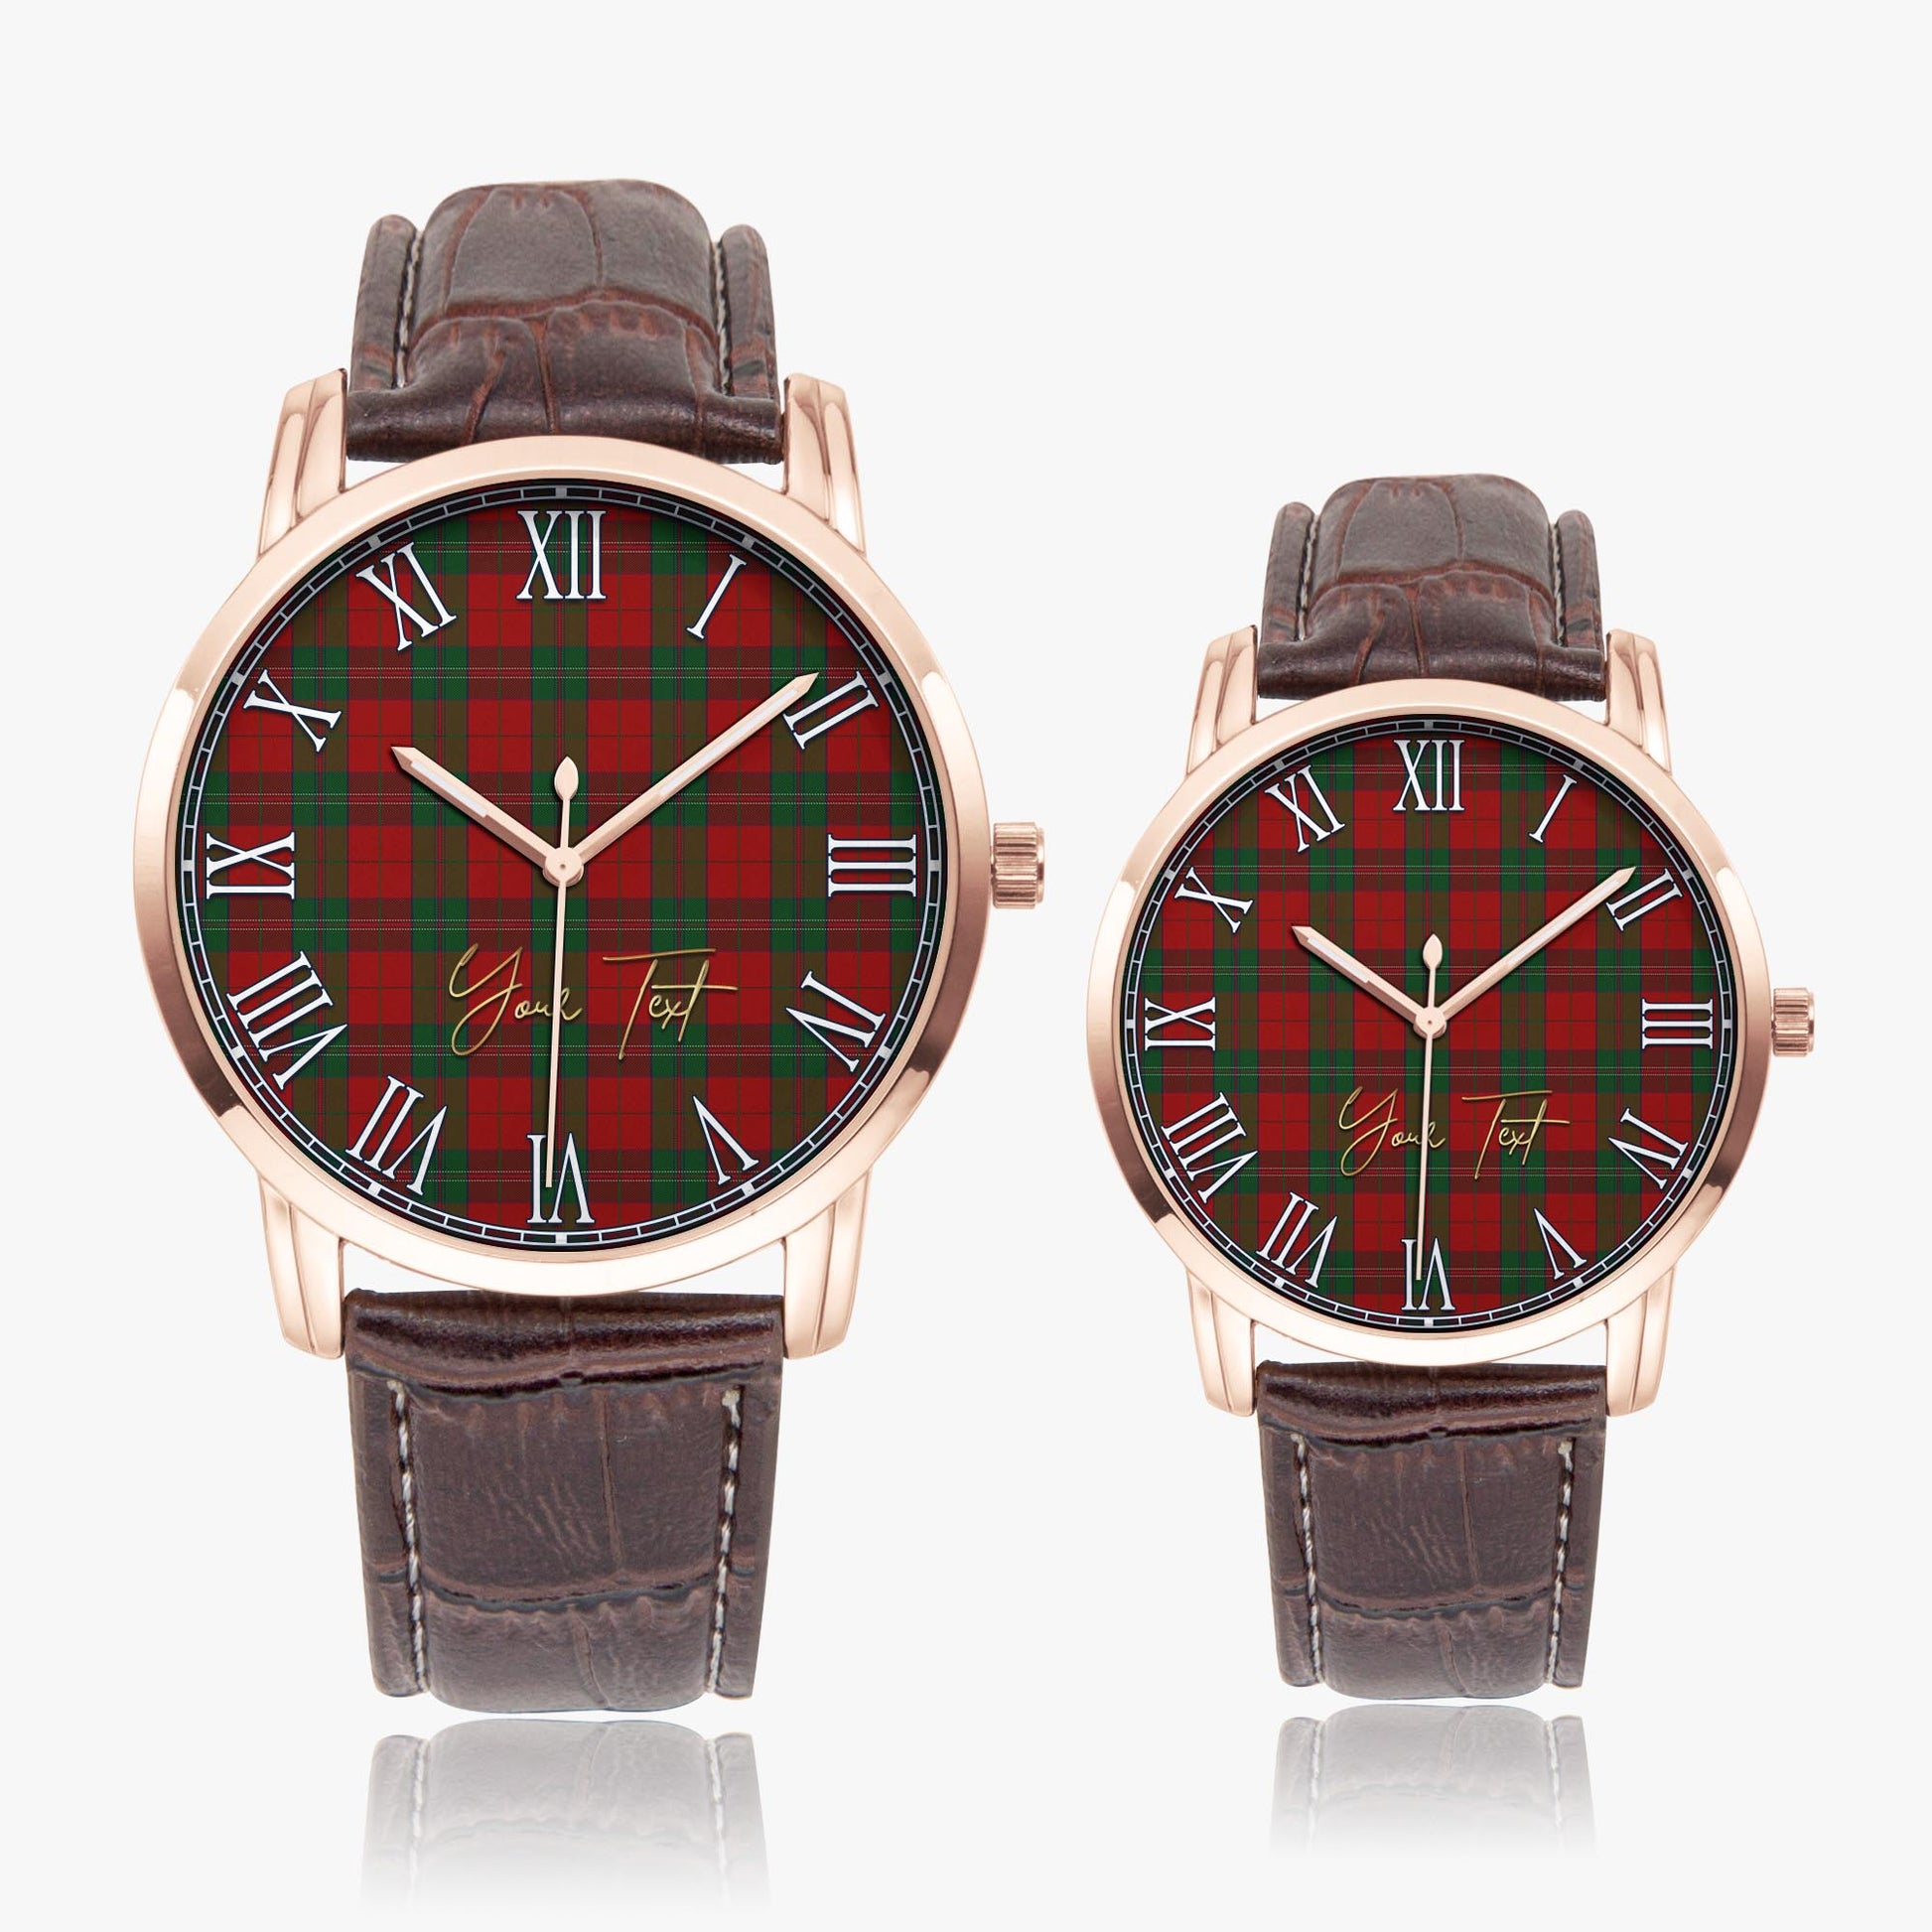 Thomas of Wales Tartan Personalized Your Text Leather Trap Quartz Watch Wide Type Rose Gold Case With Brown Leather Strap - Tartanvibesclothing Shop